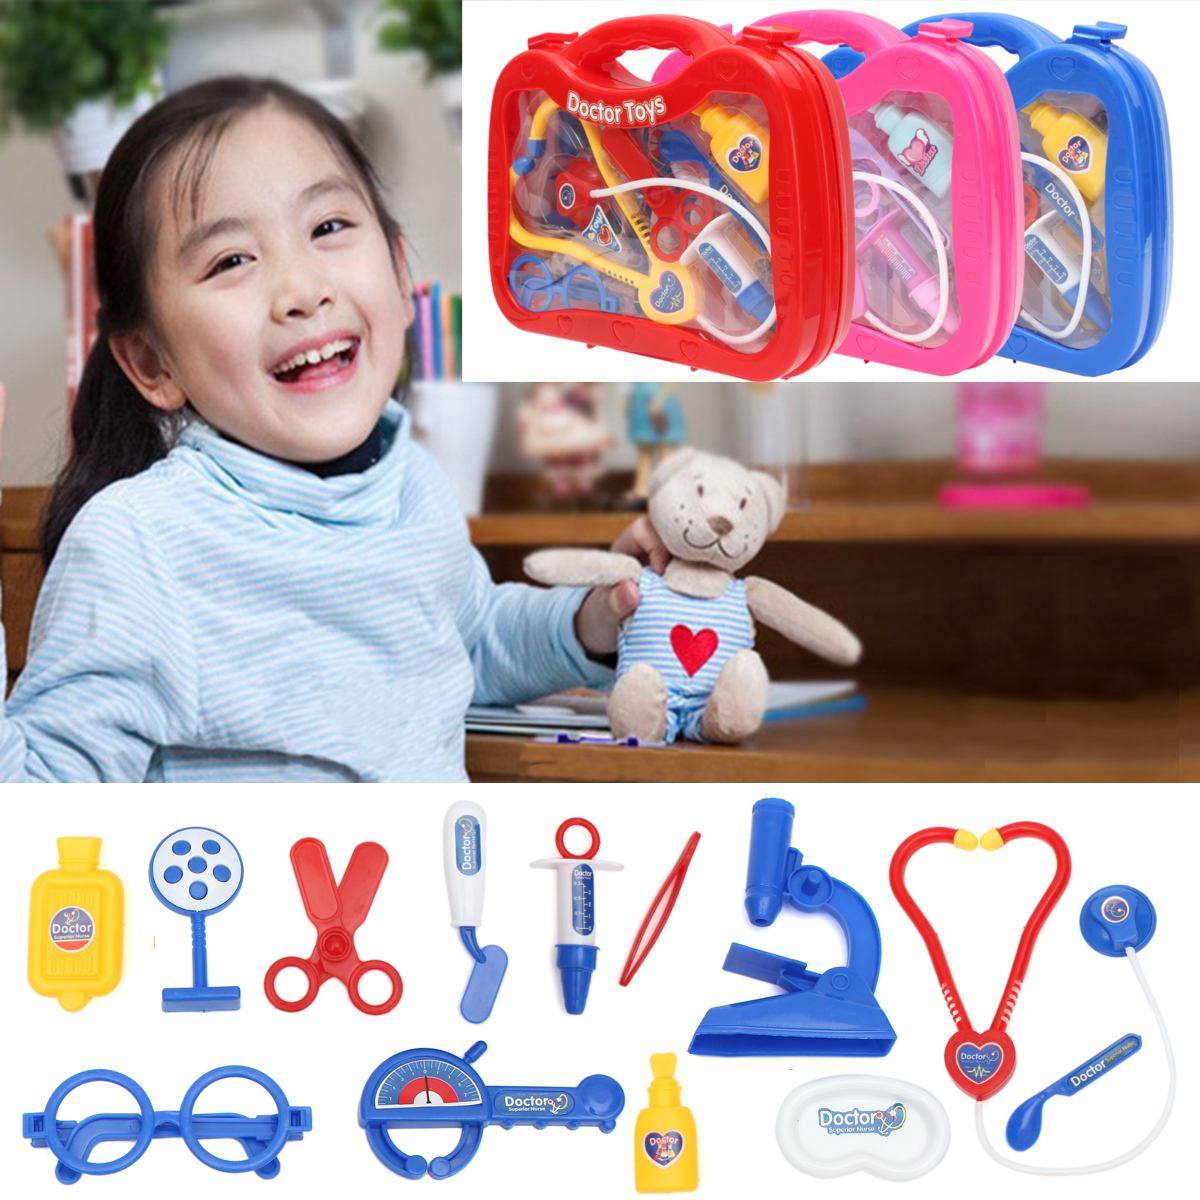 Kids Childrens Role Play Doctor Nurses Toy Medical Set Kit Gift Toys 13